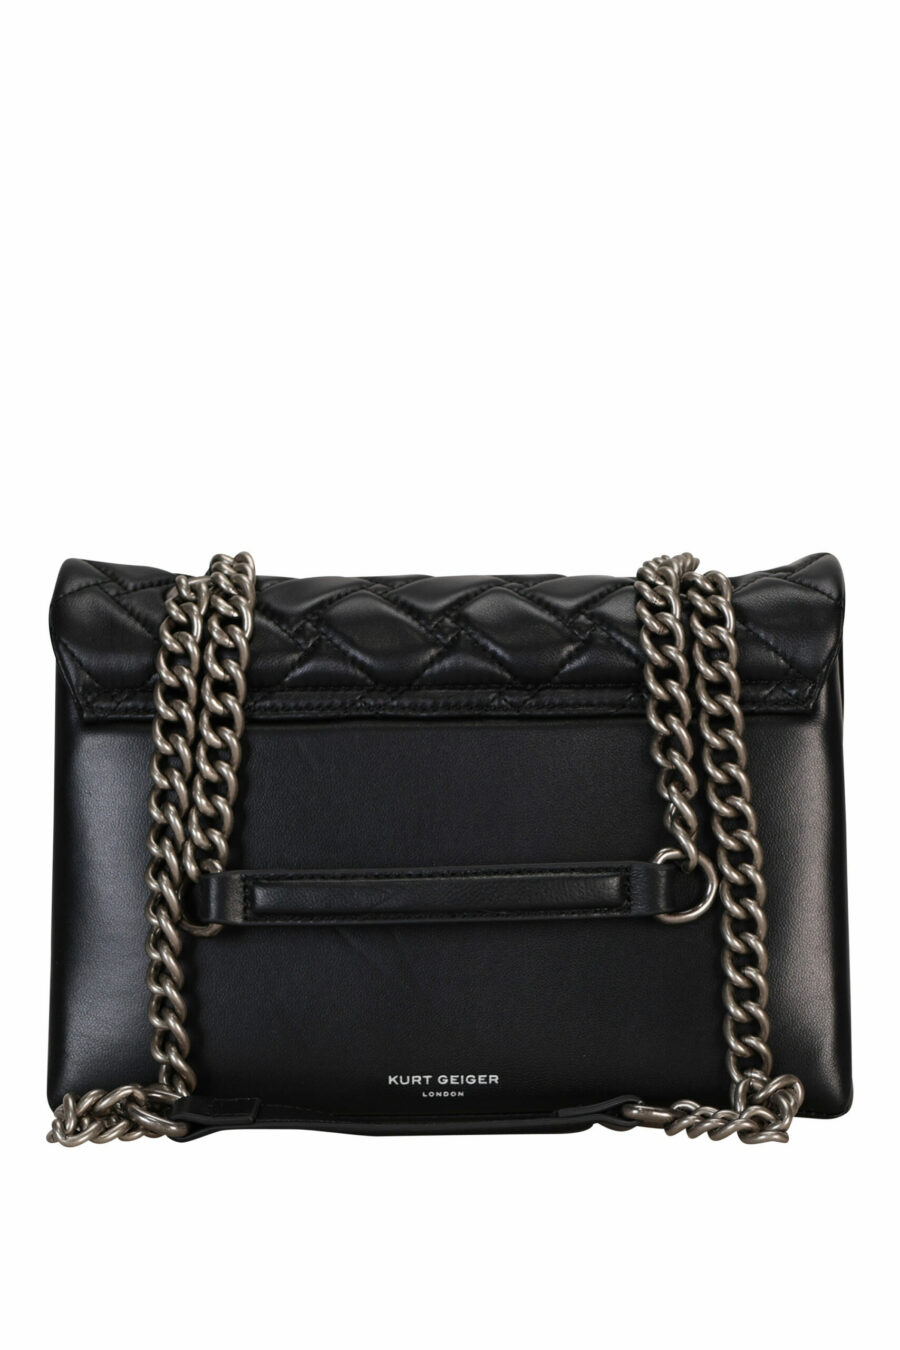 Black quilted shoulder bag with silver chain and silver eagle logo with black crystals - 5057720813514 2 scaled